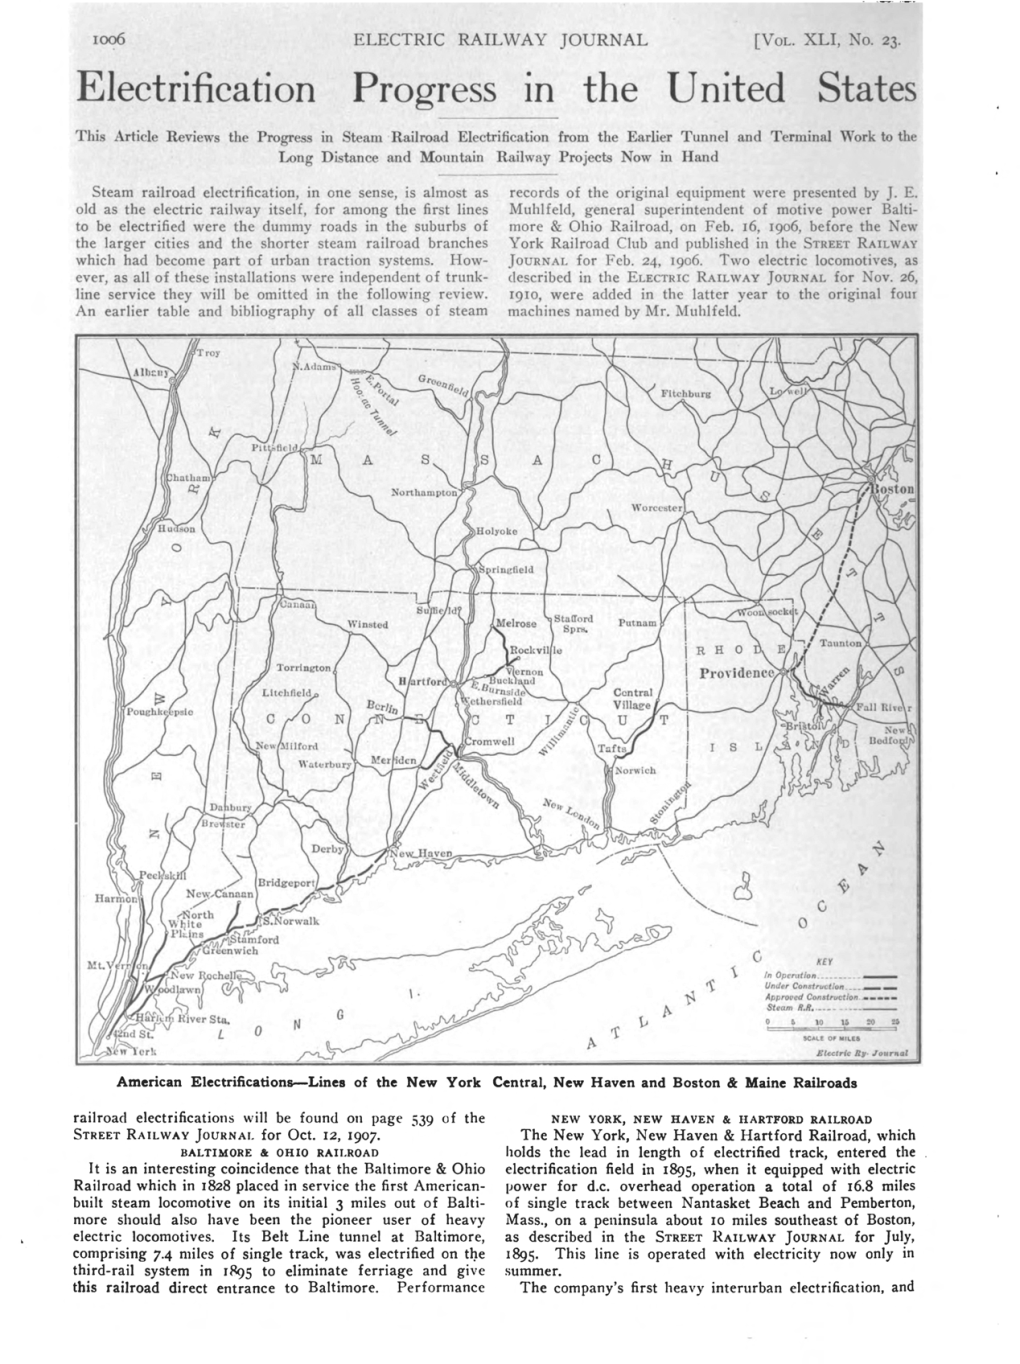 American Electrifications-Lines of the New York Central, New Haven And